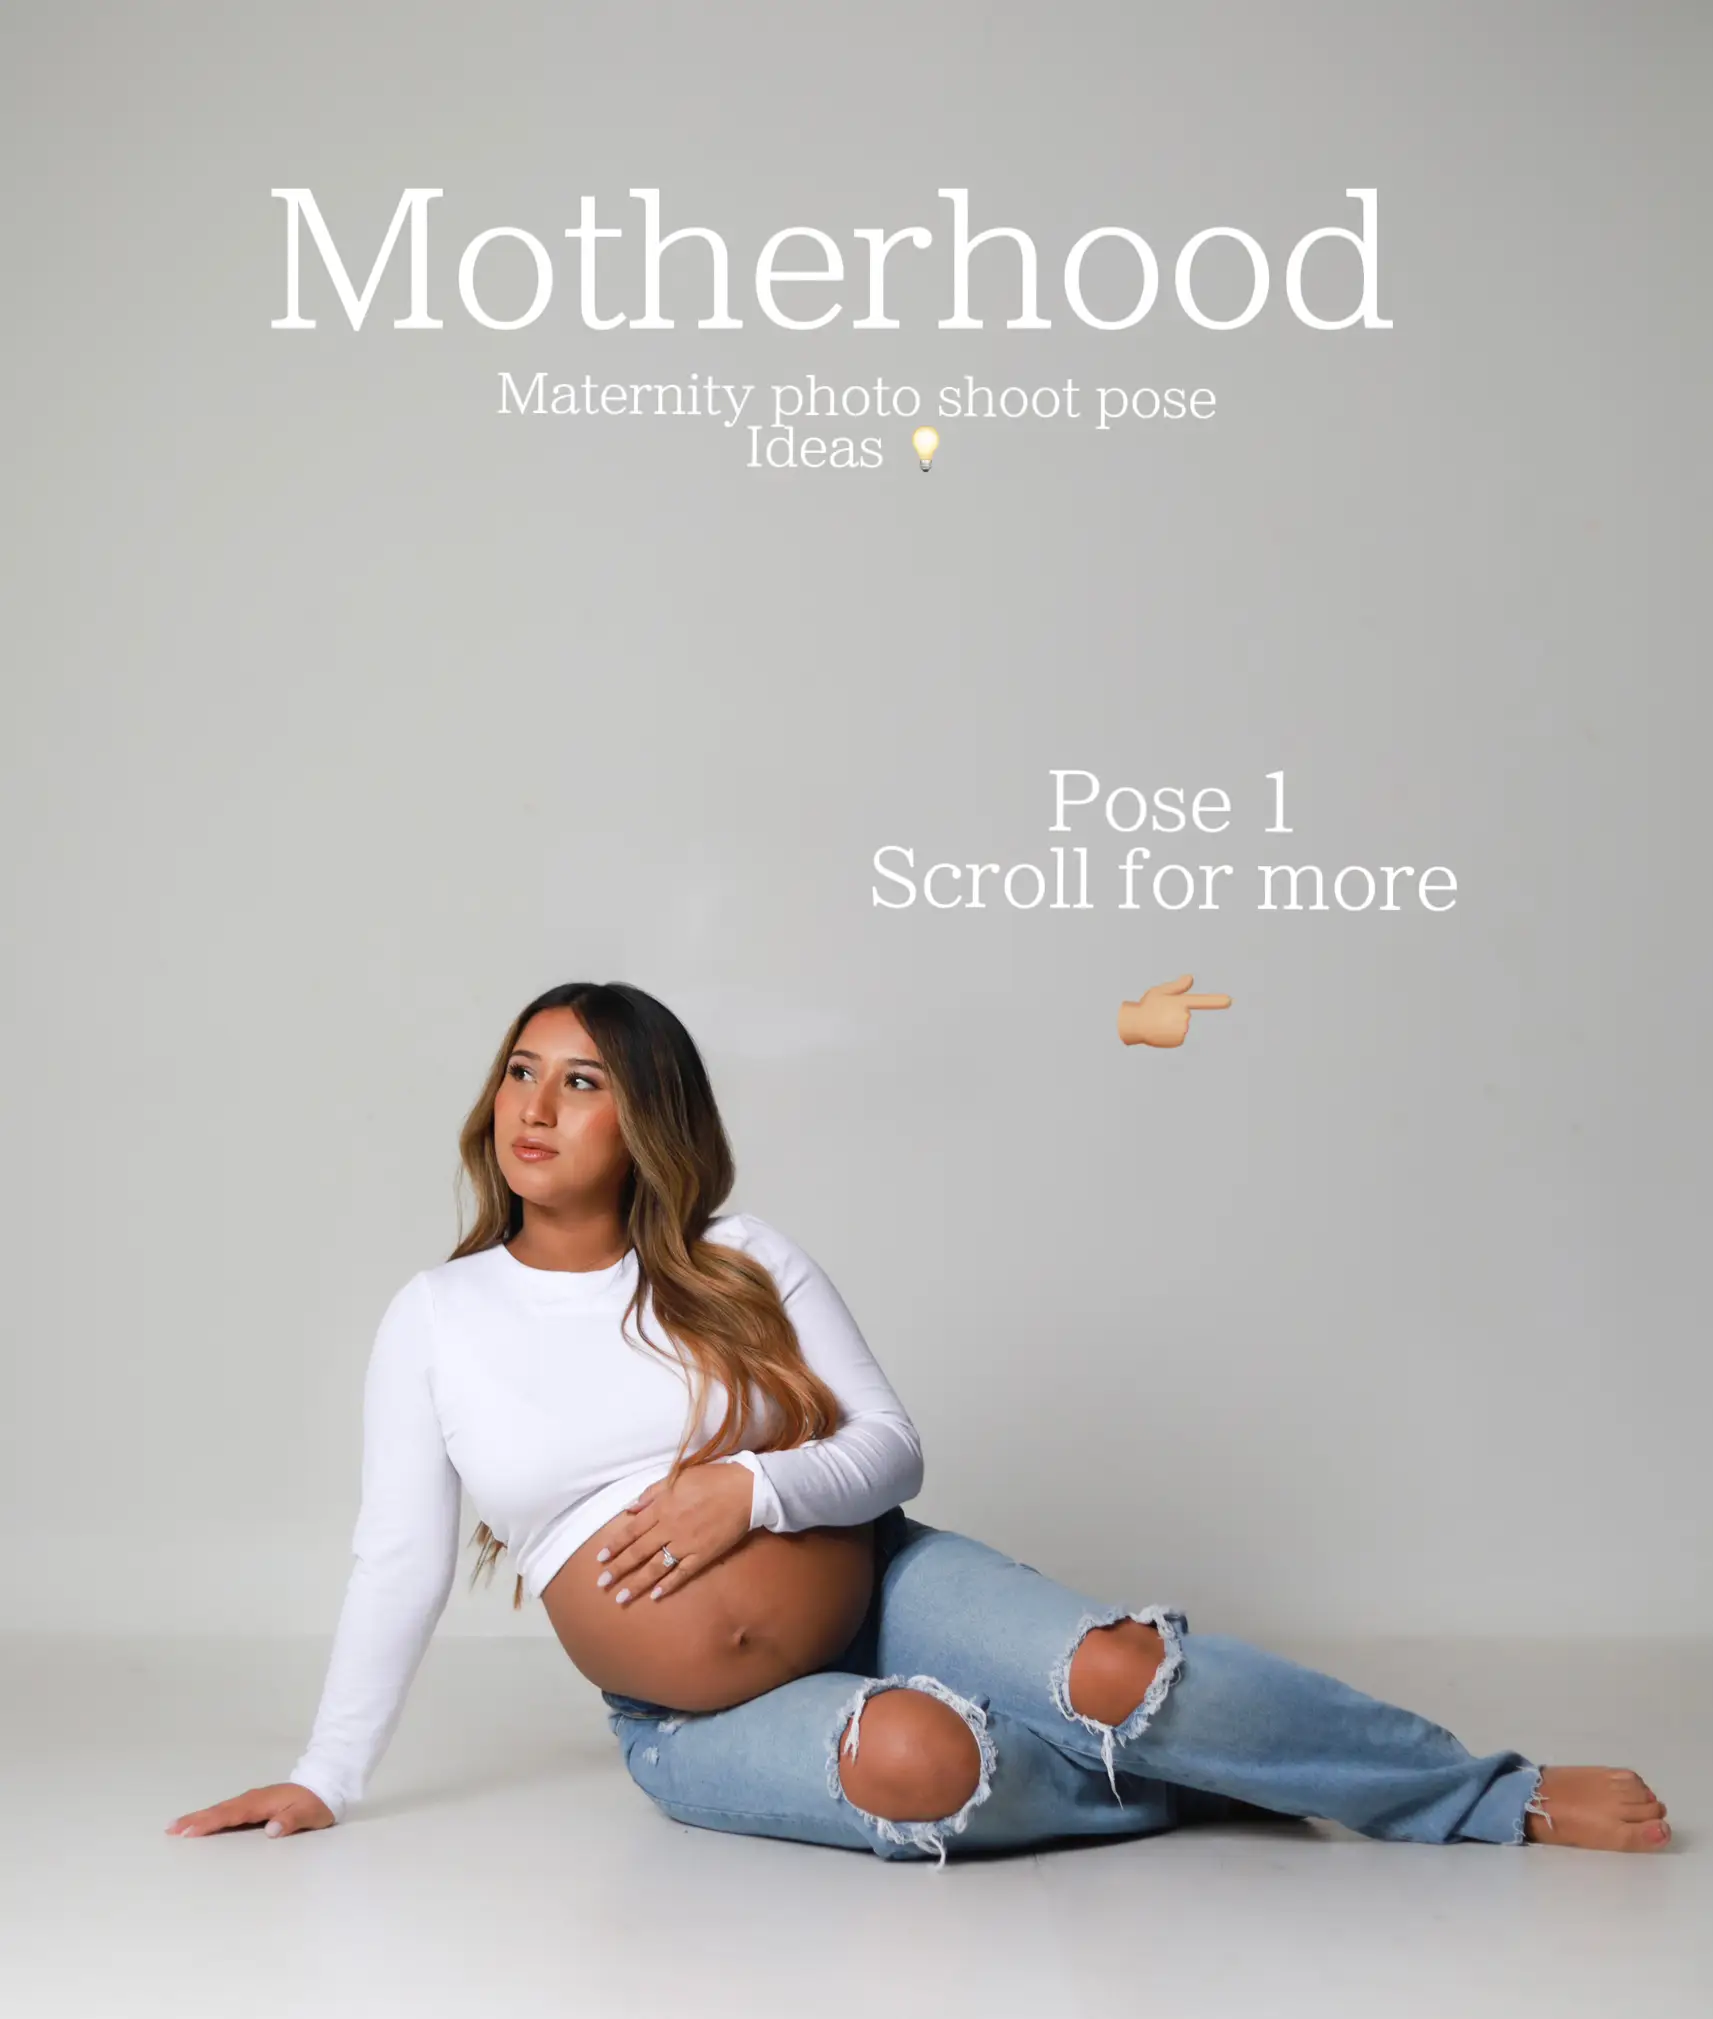 Fall Maternity Photos: Outfits, Poses and Priceless Tips